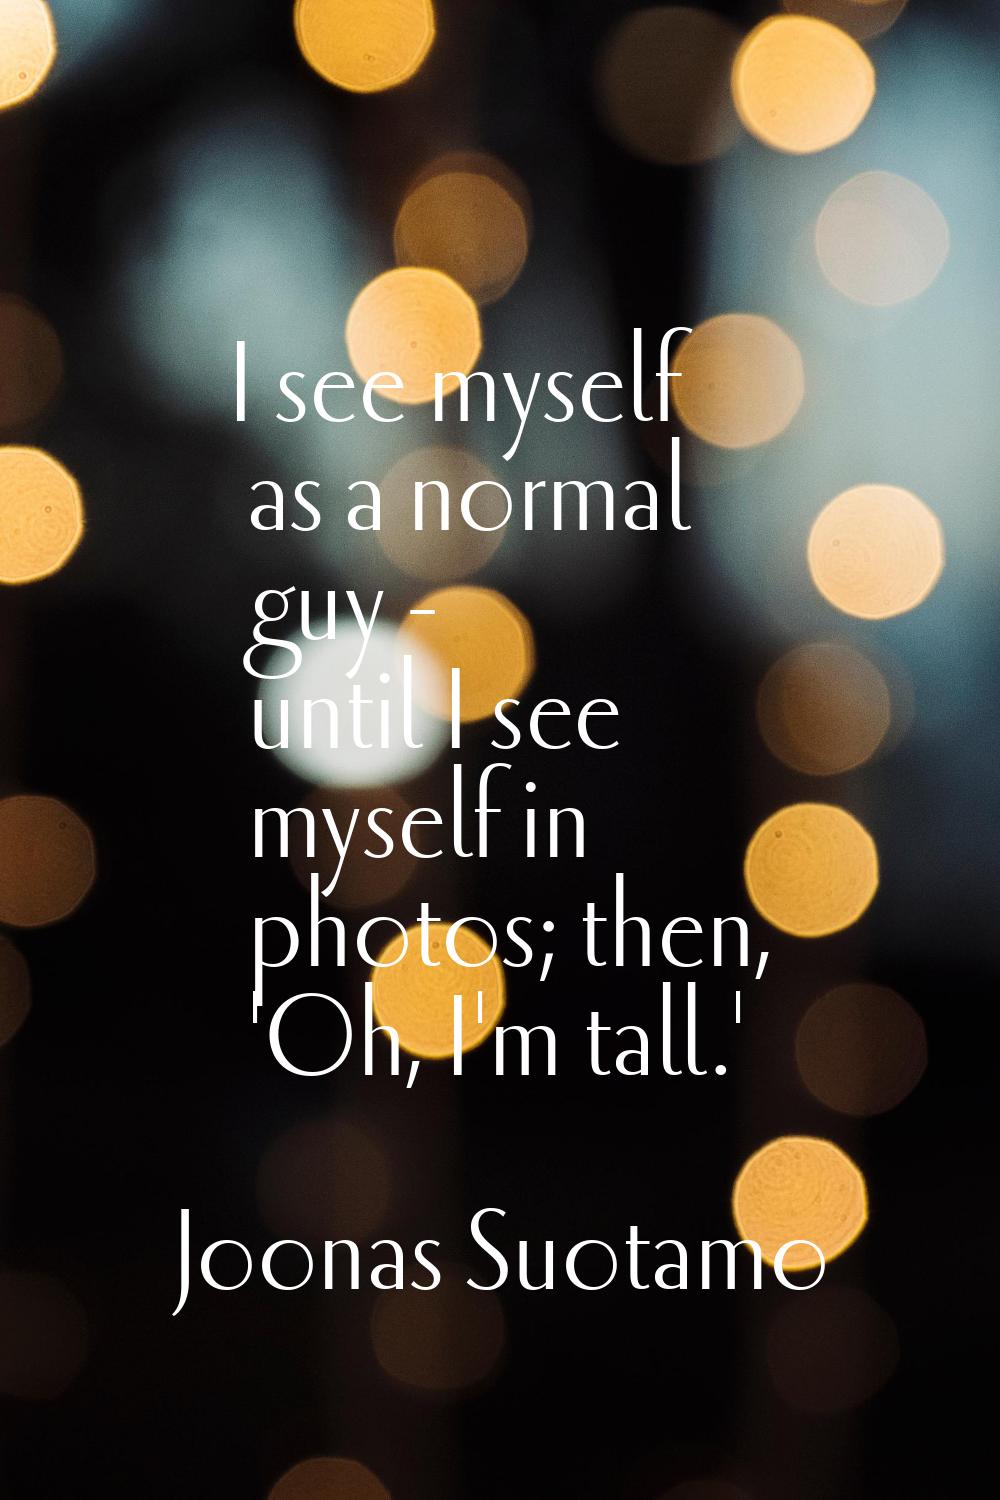 I see myself as a normal guy - until I see myself in photos; then, 'Oh, I'm tall.'